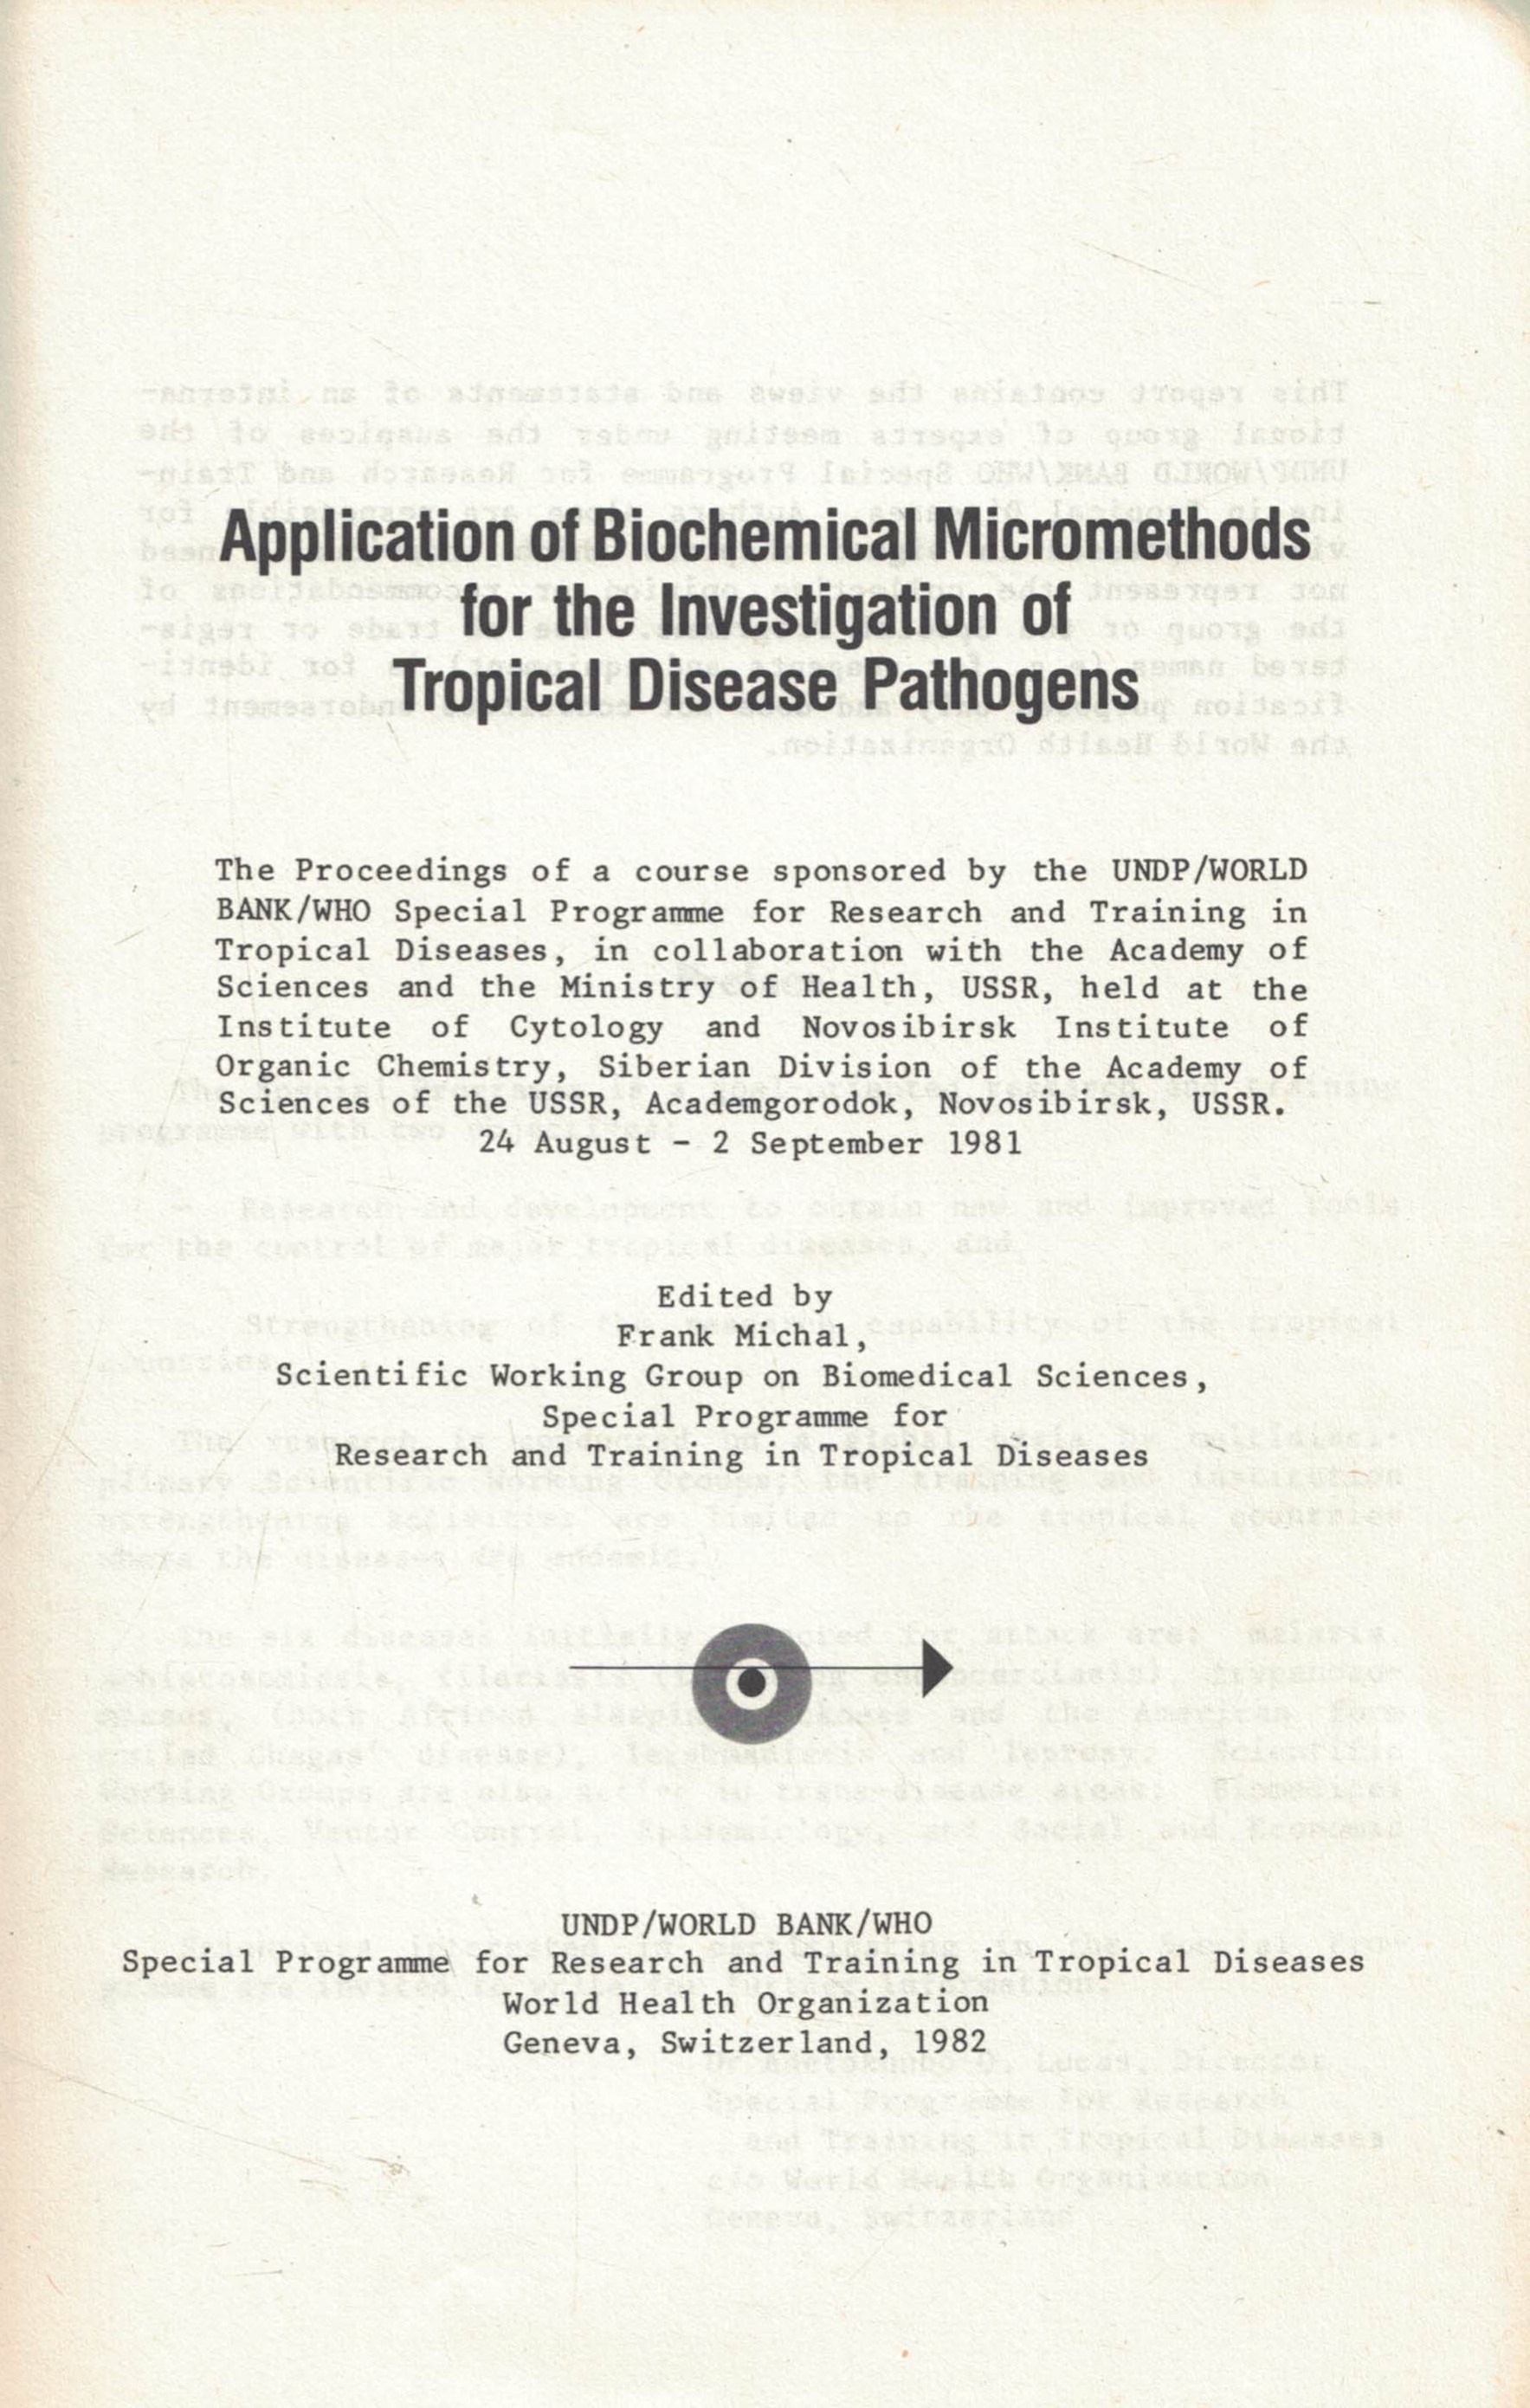 Application of Biochemical Micromethods for the Investigation of Tropical Disease Pathogens